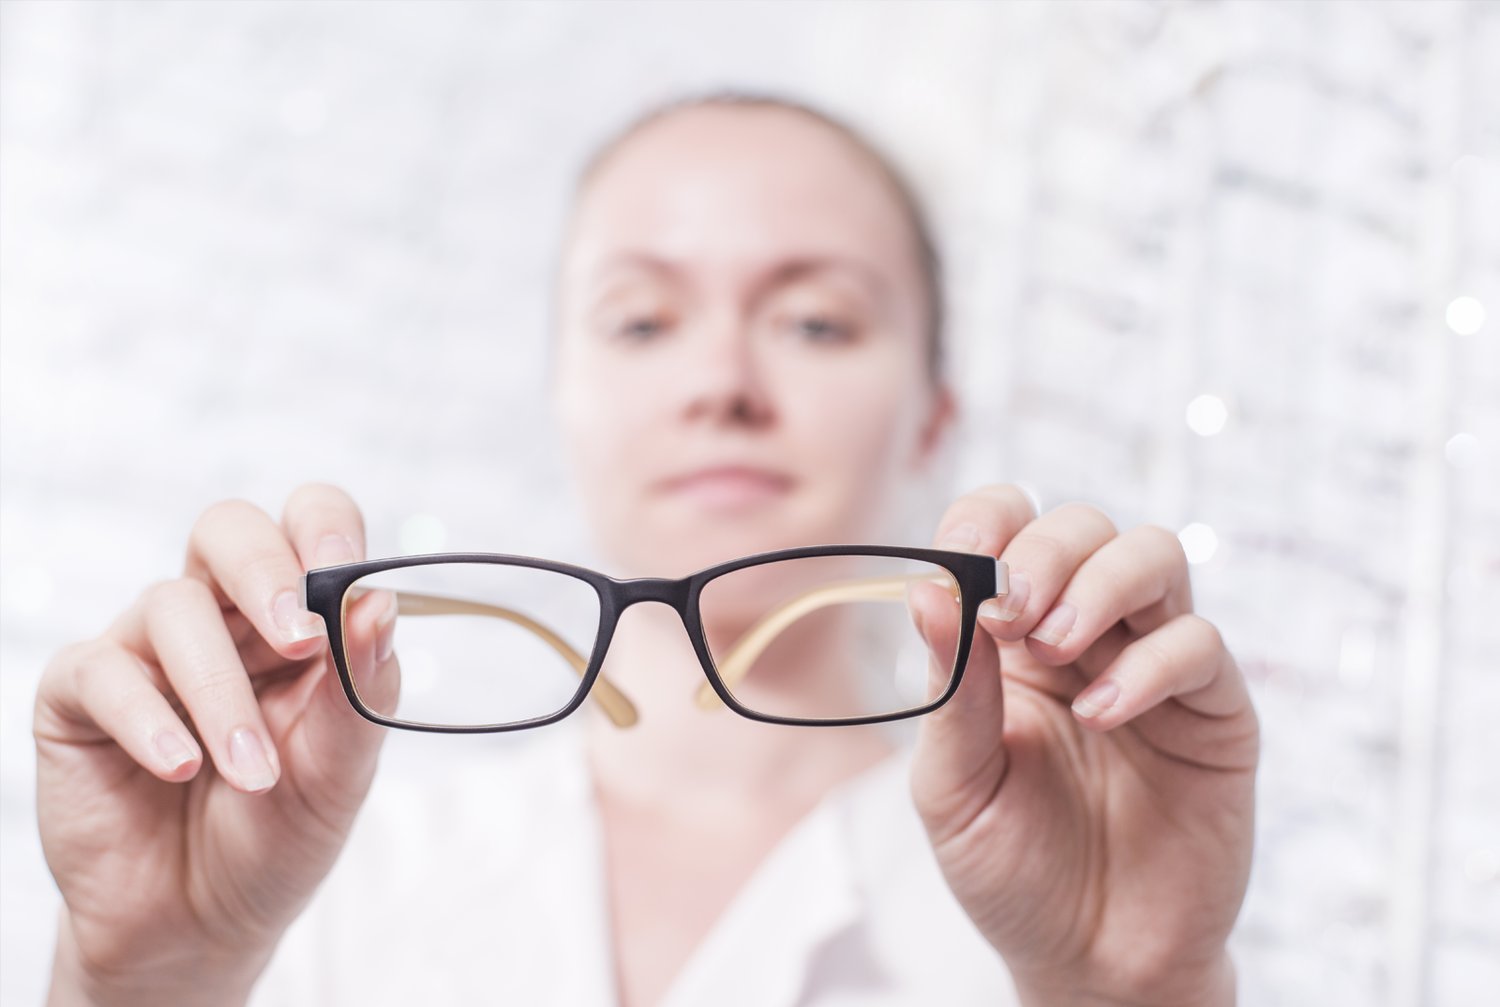 Tips on Eyewear Care and Cleaning